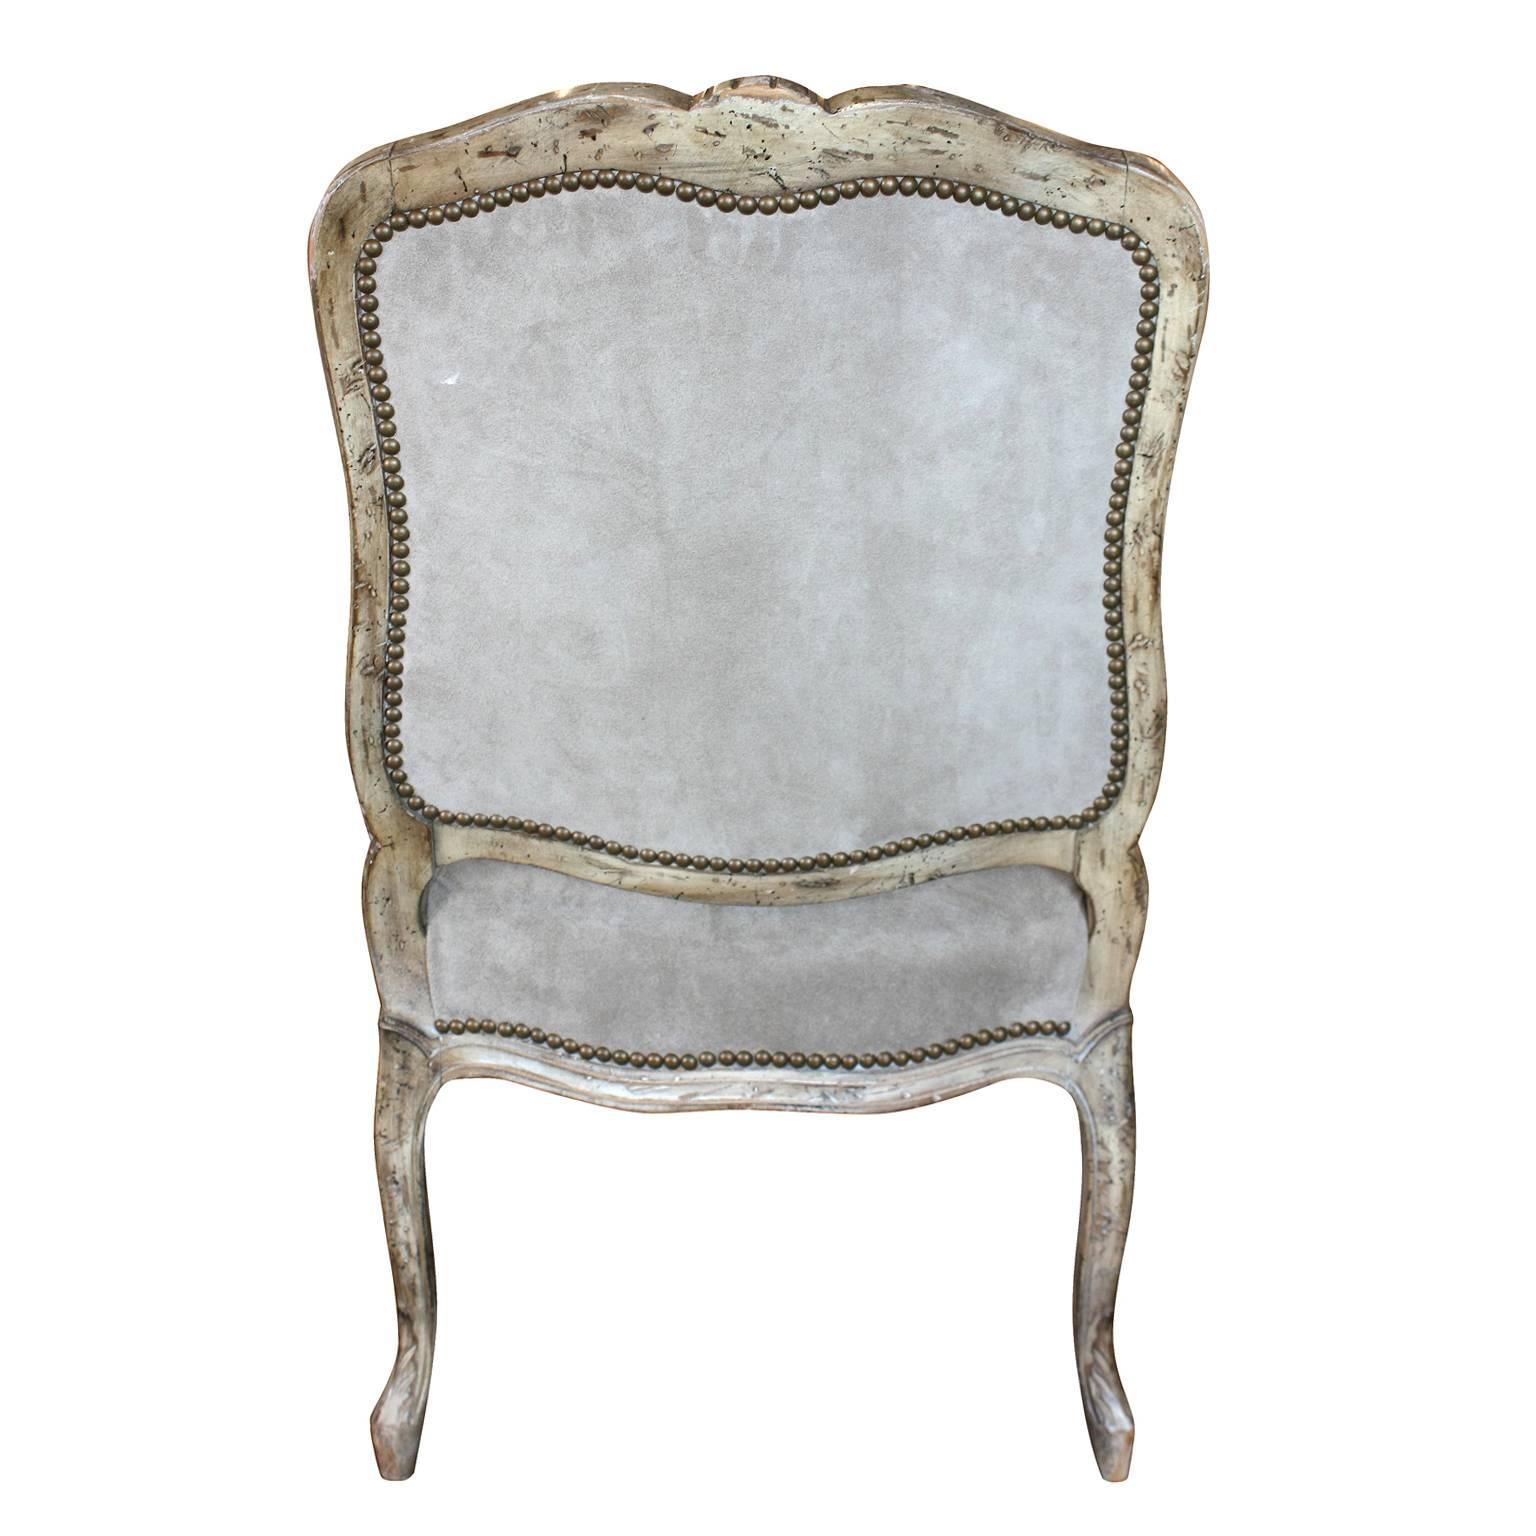 Pair of 19th century Louis XV chairs, grey suede upholstery.